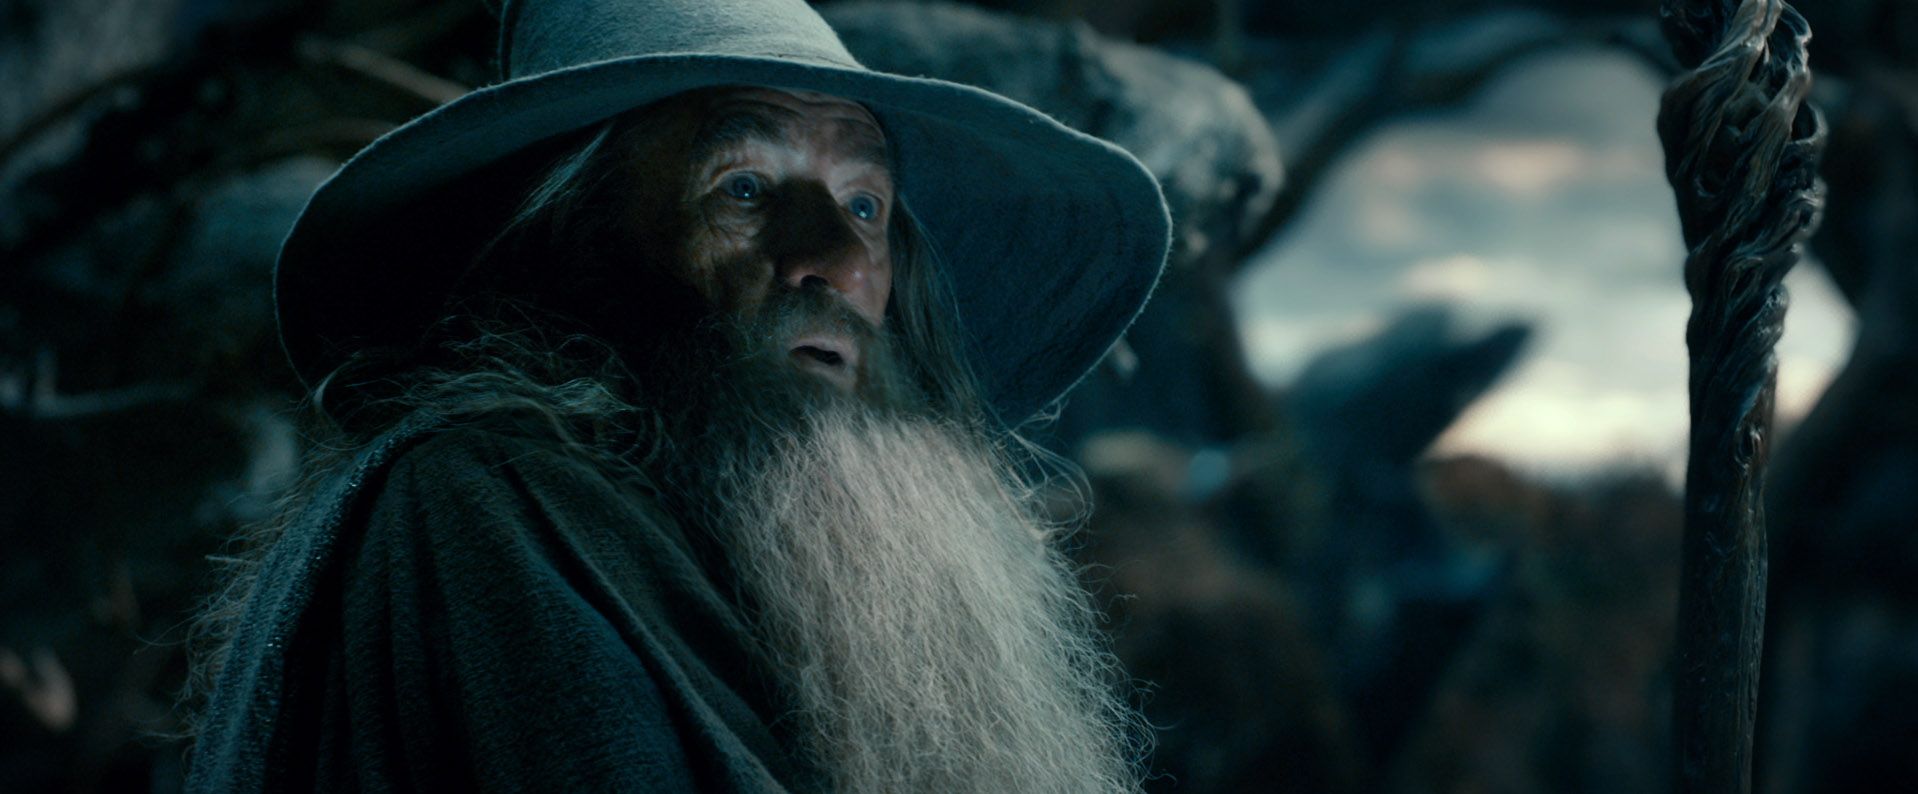 Gandalf in 'The Hobbit: The Desolation of Smaug'